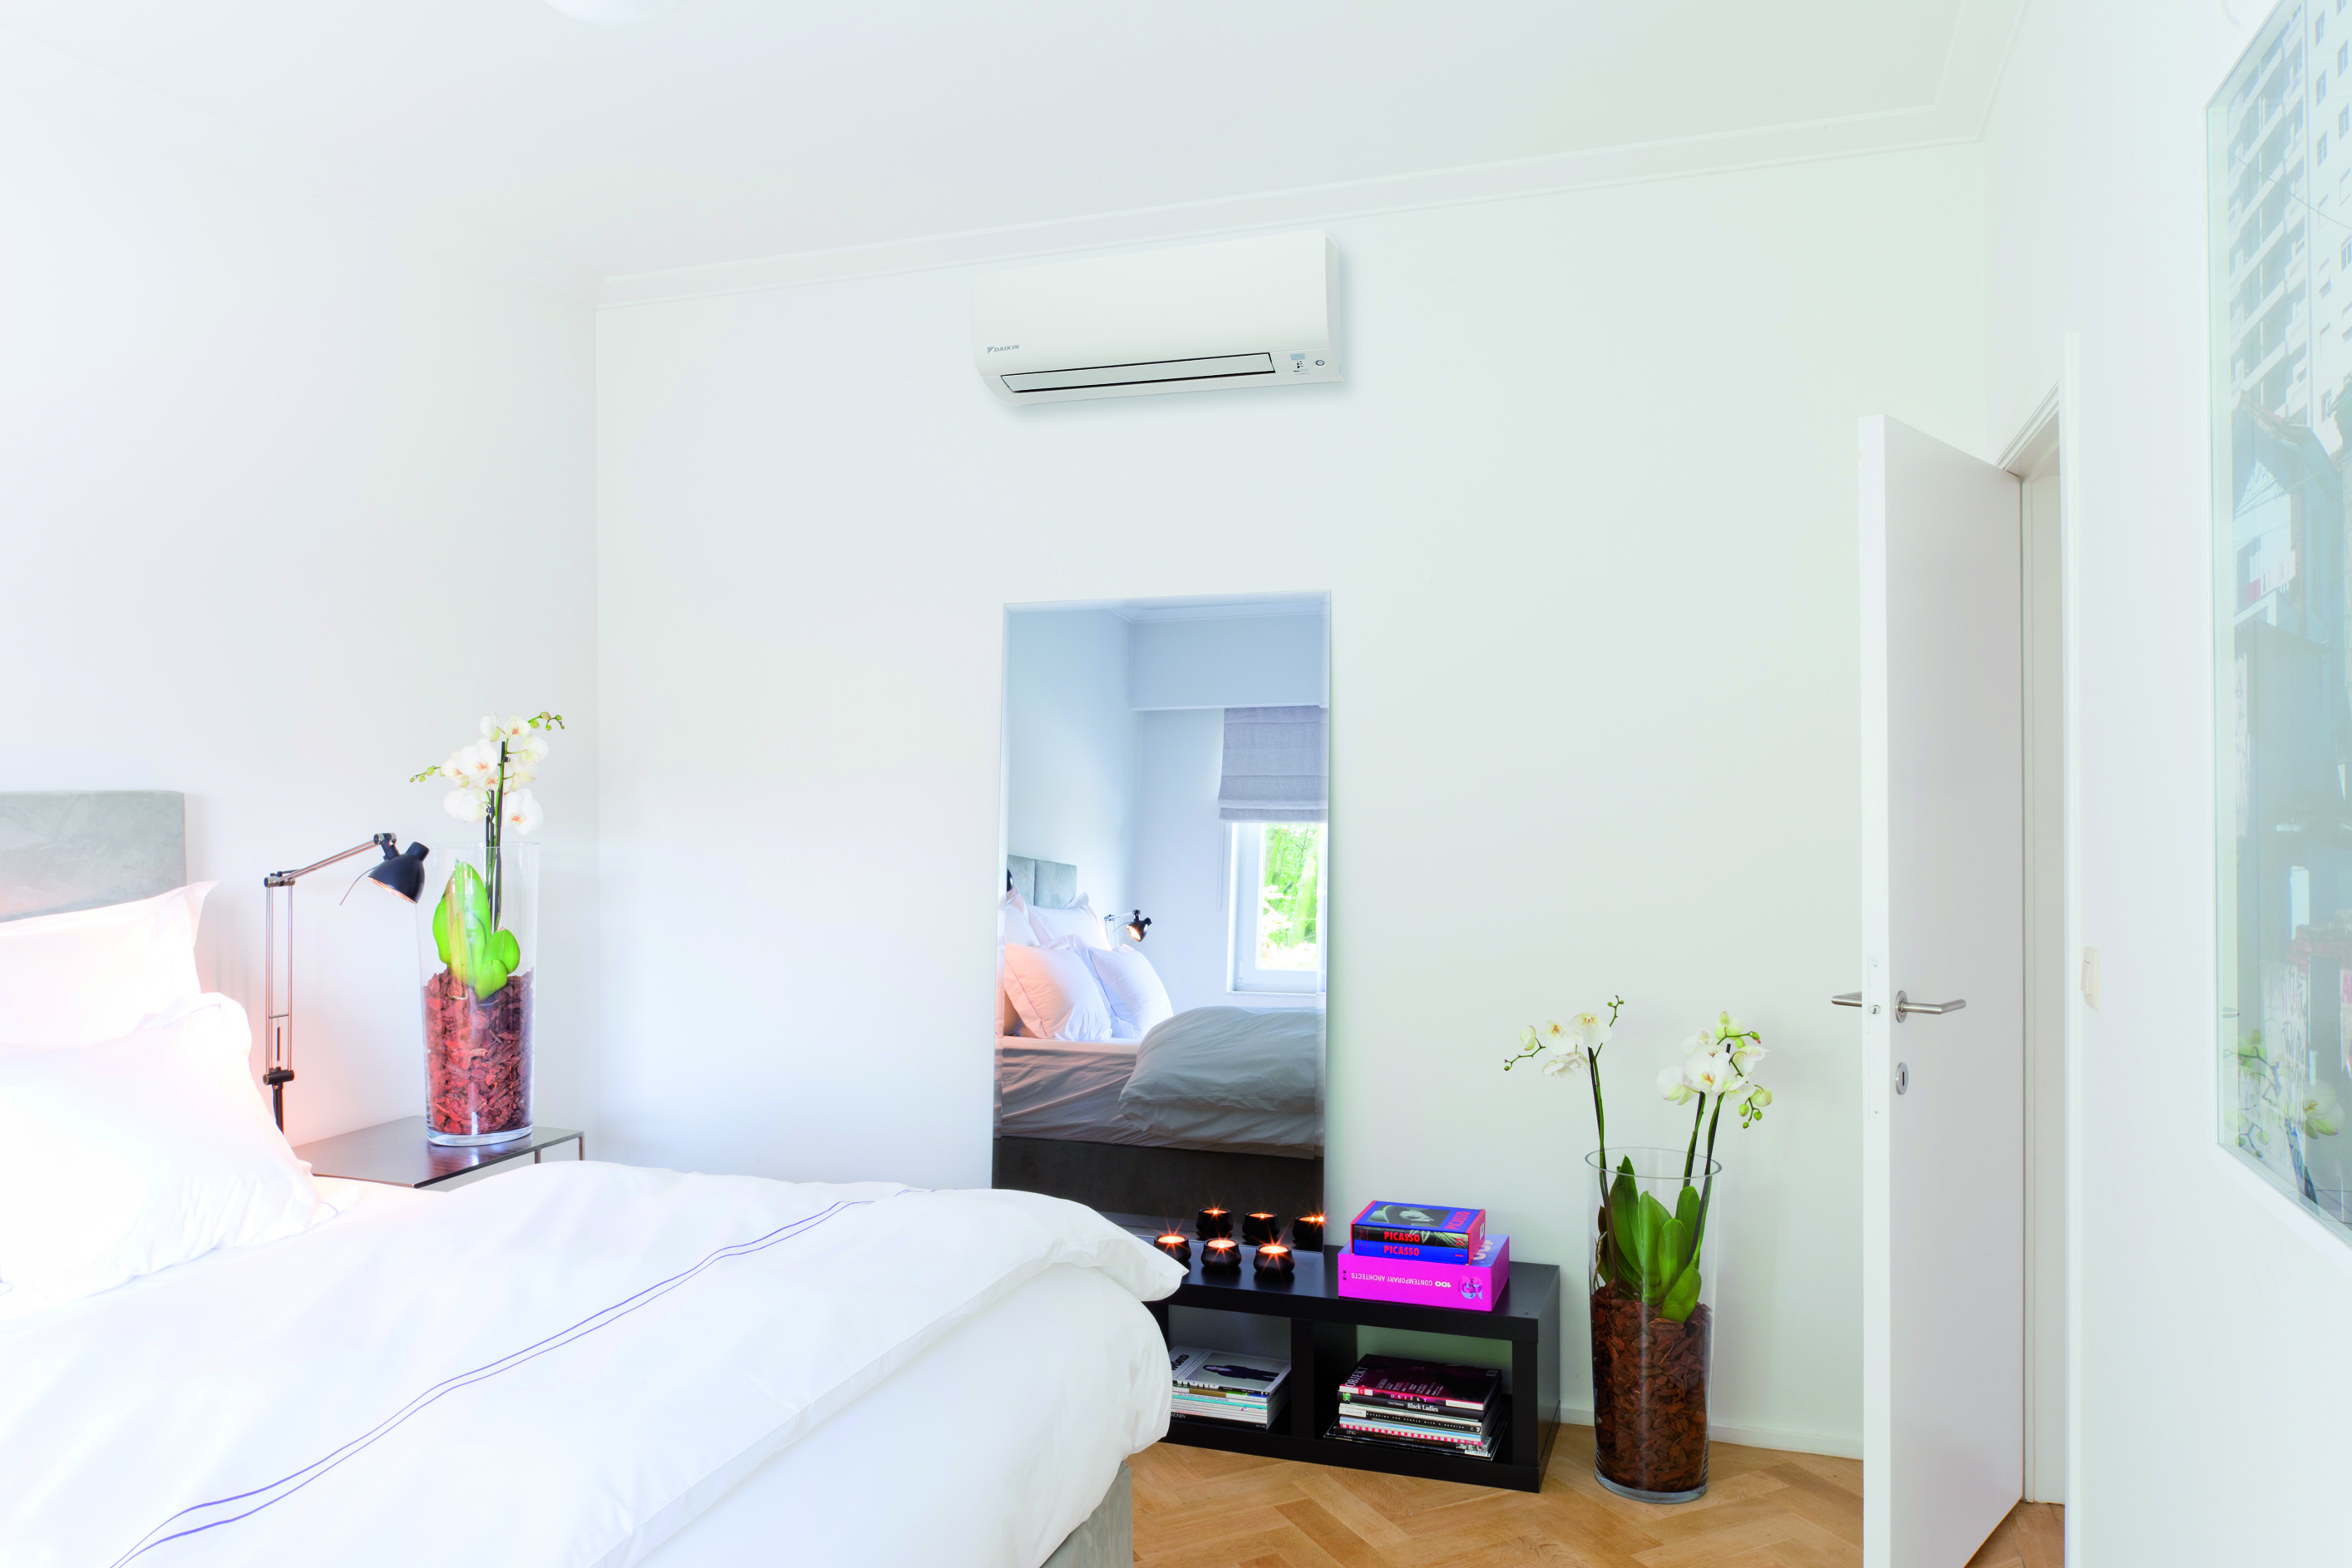 Ductless Heat Pumps:  Incentives Cover Up To 40% of the Cost